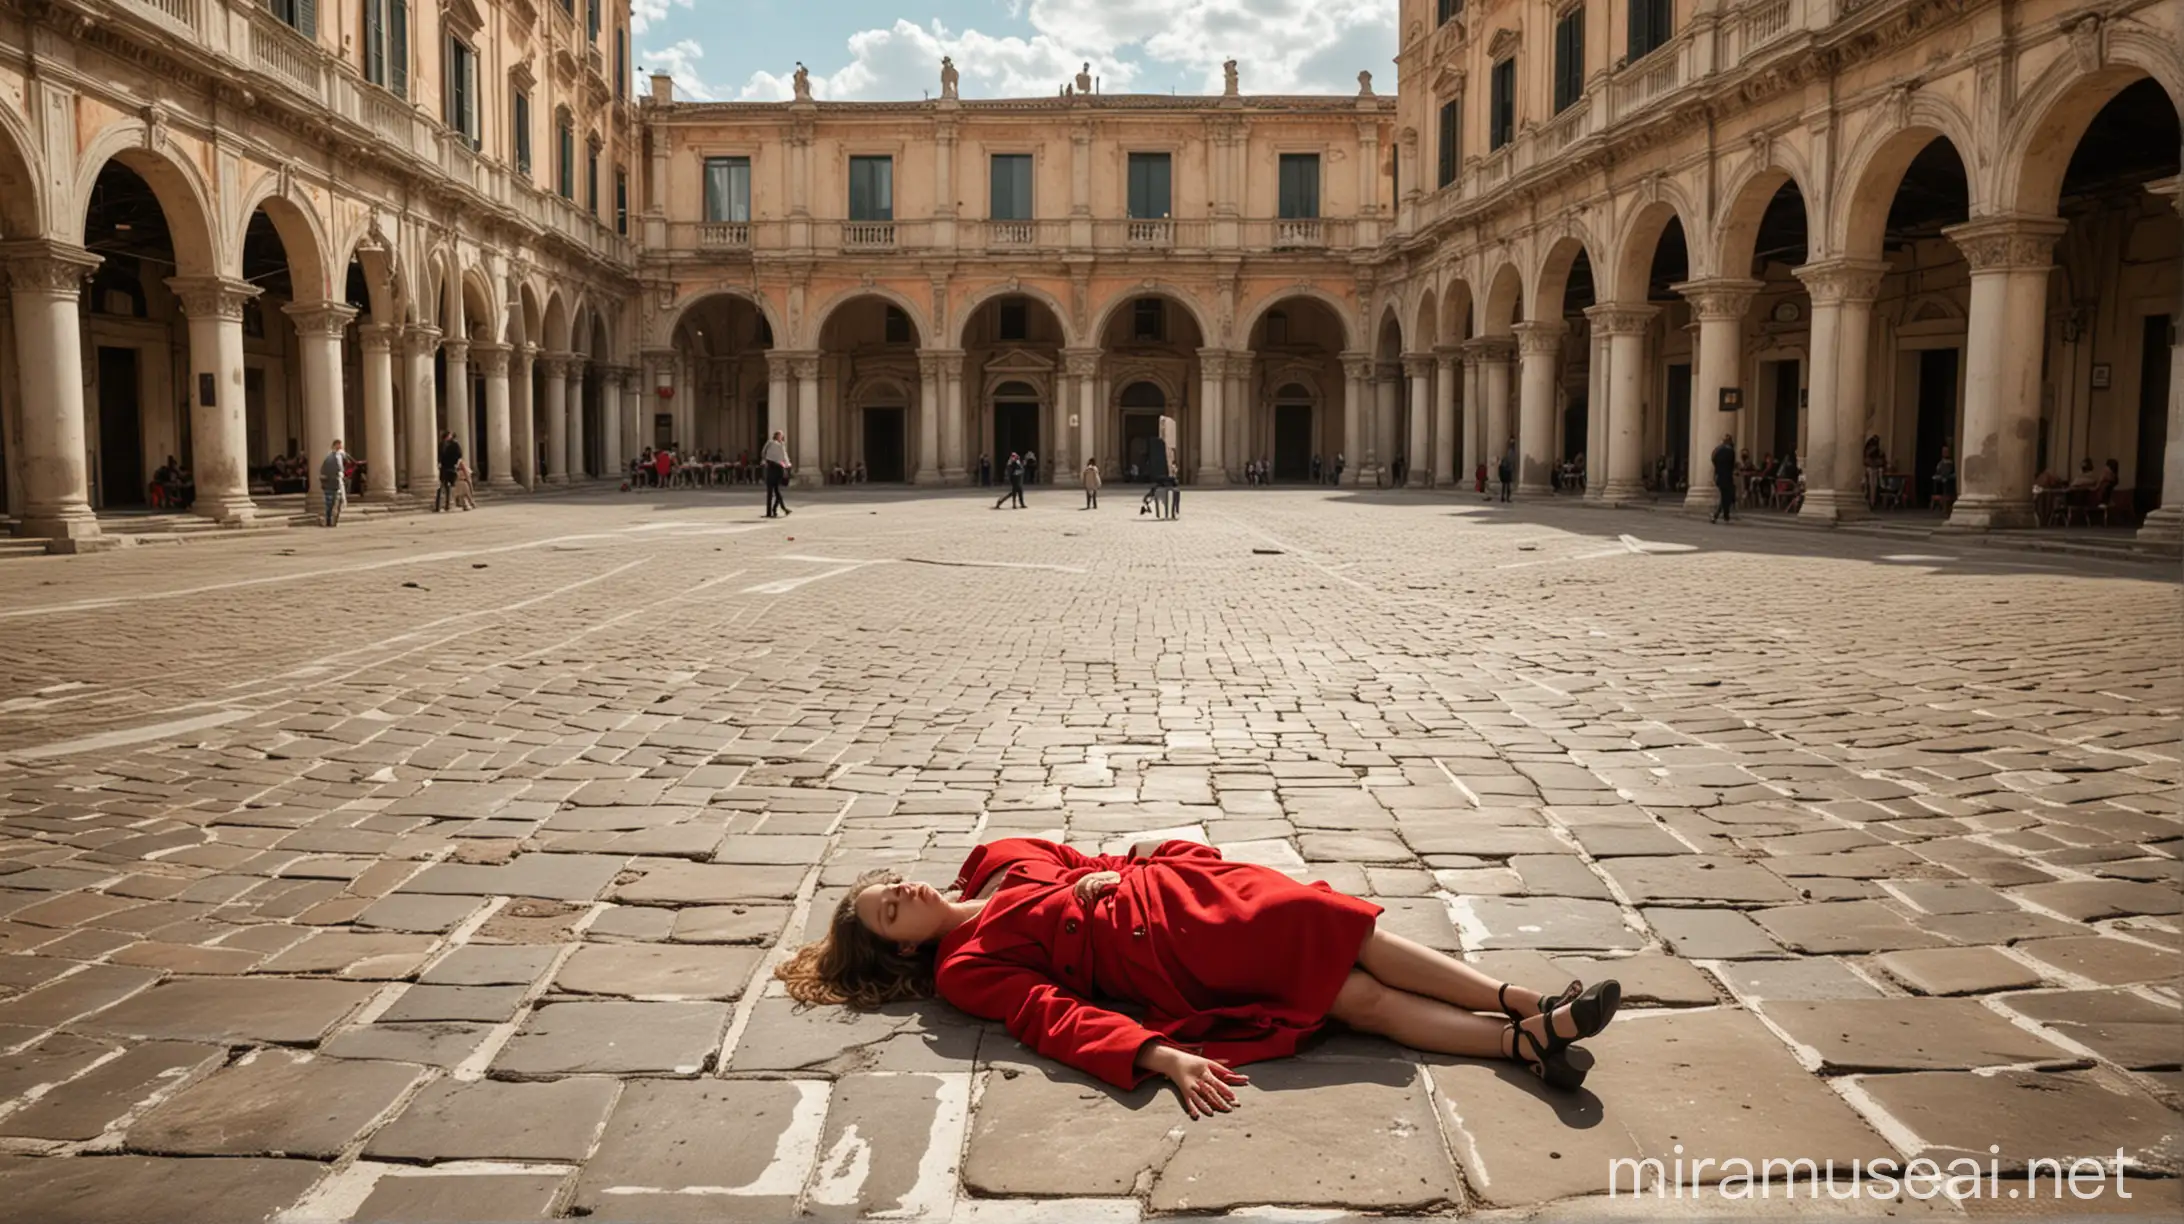 Woman in Red Coat Resting Amidst Baroque Architecture in Italian City Square